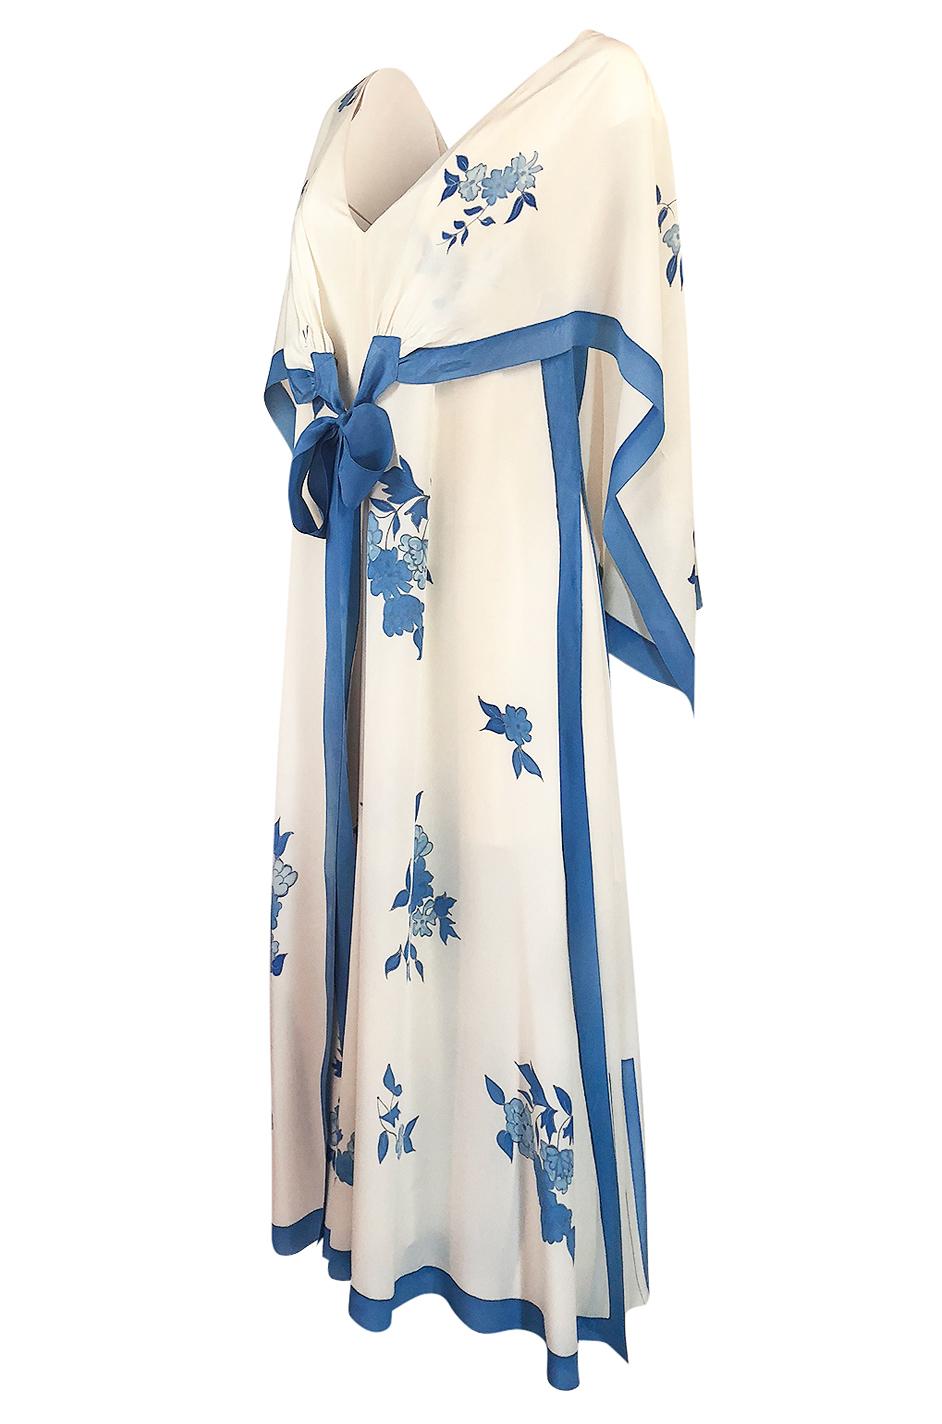 Women's Karl Lagerfeld for Chloe Blue Floral Print Silk Print Dress and Capelet, c 1974